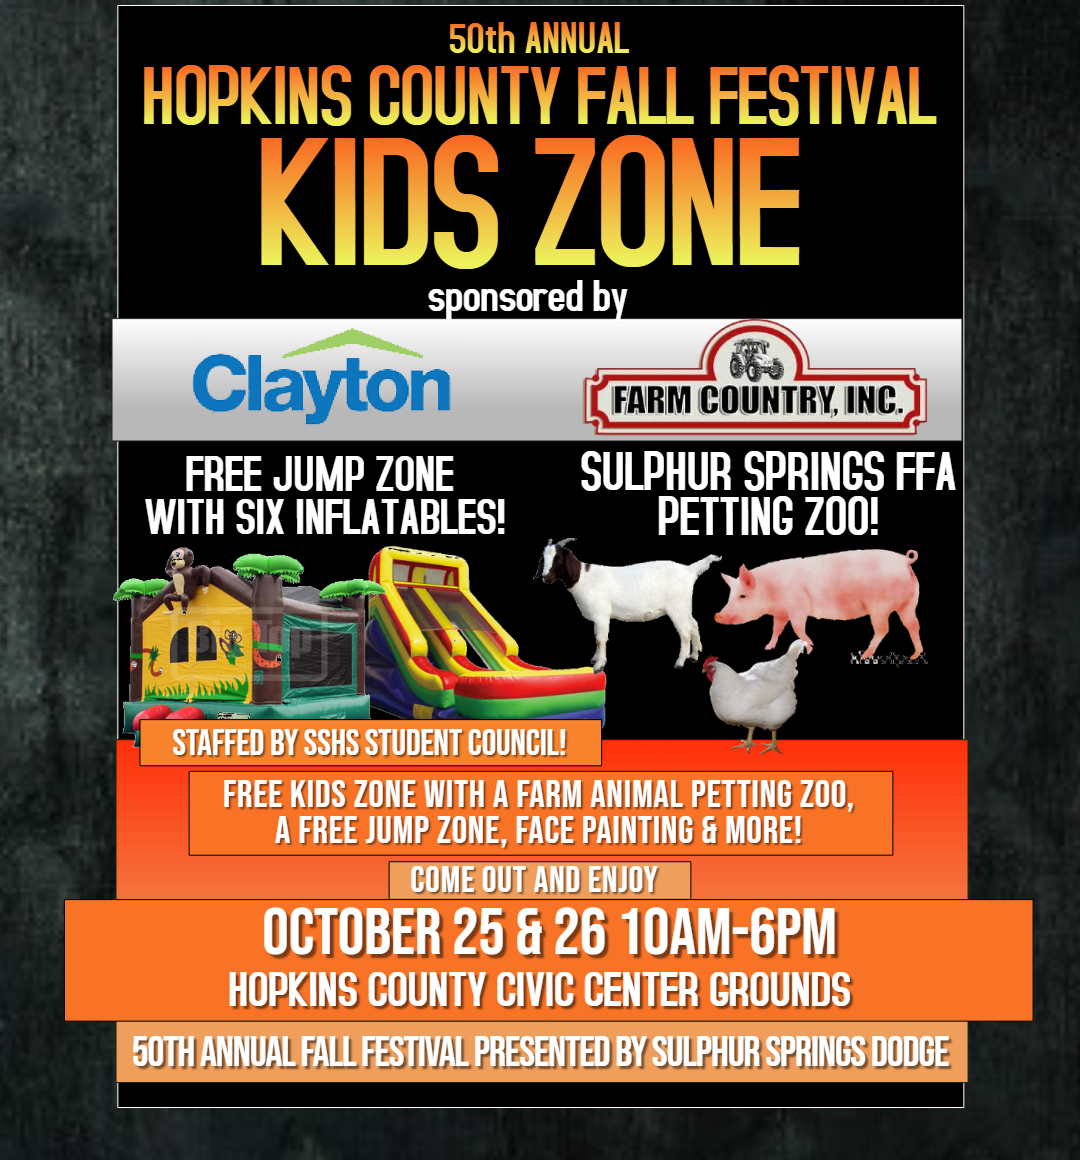 2019 Hopkins County Fall Festival Presented by SS Dodge Hosting Free Kids Zone Sponsored by Clayton Homes, Farm Country, and Abacus Healthcare on Civic Center Grounds October 25th and 26th